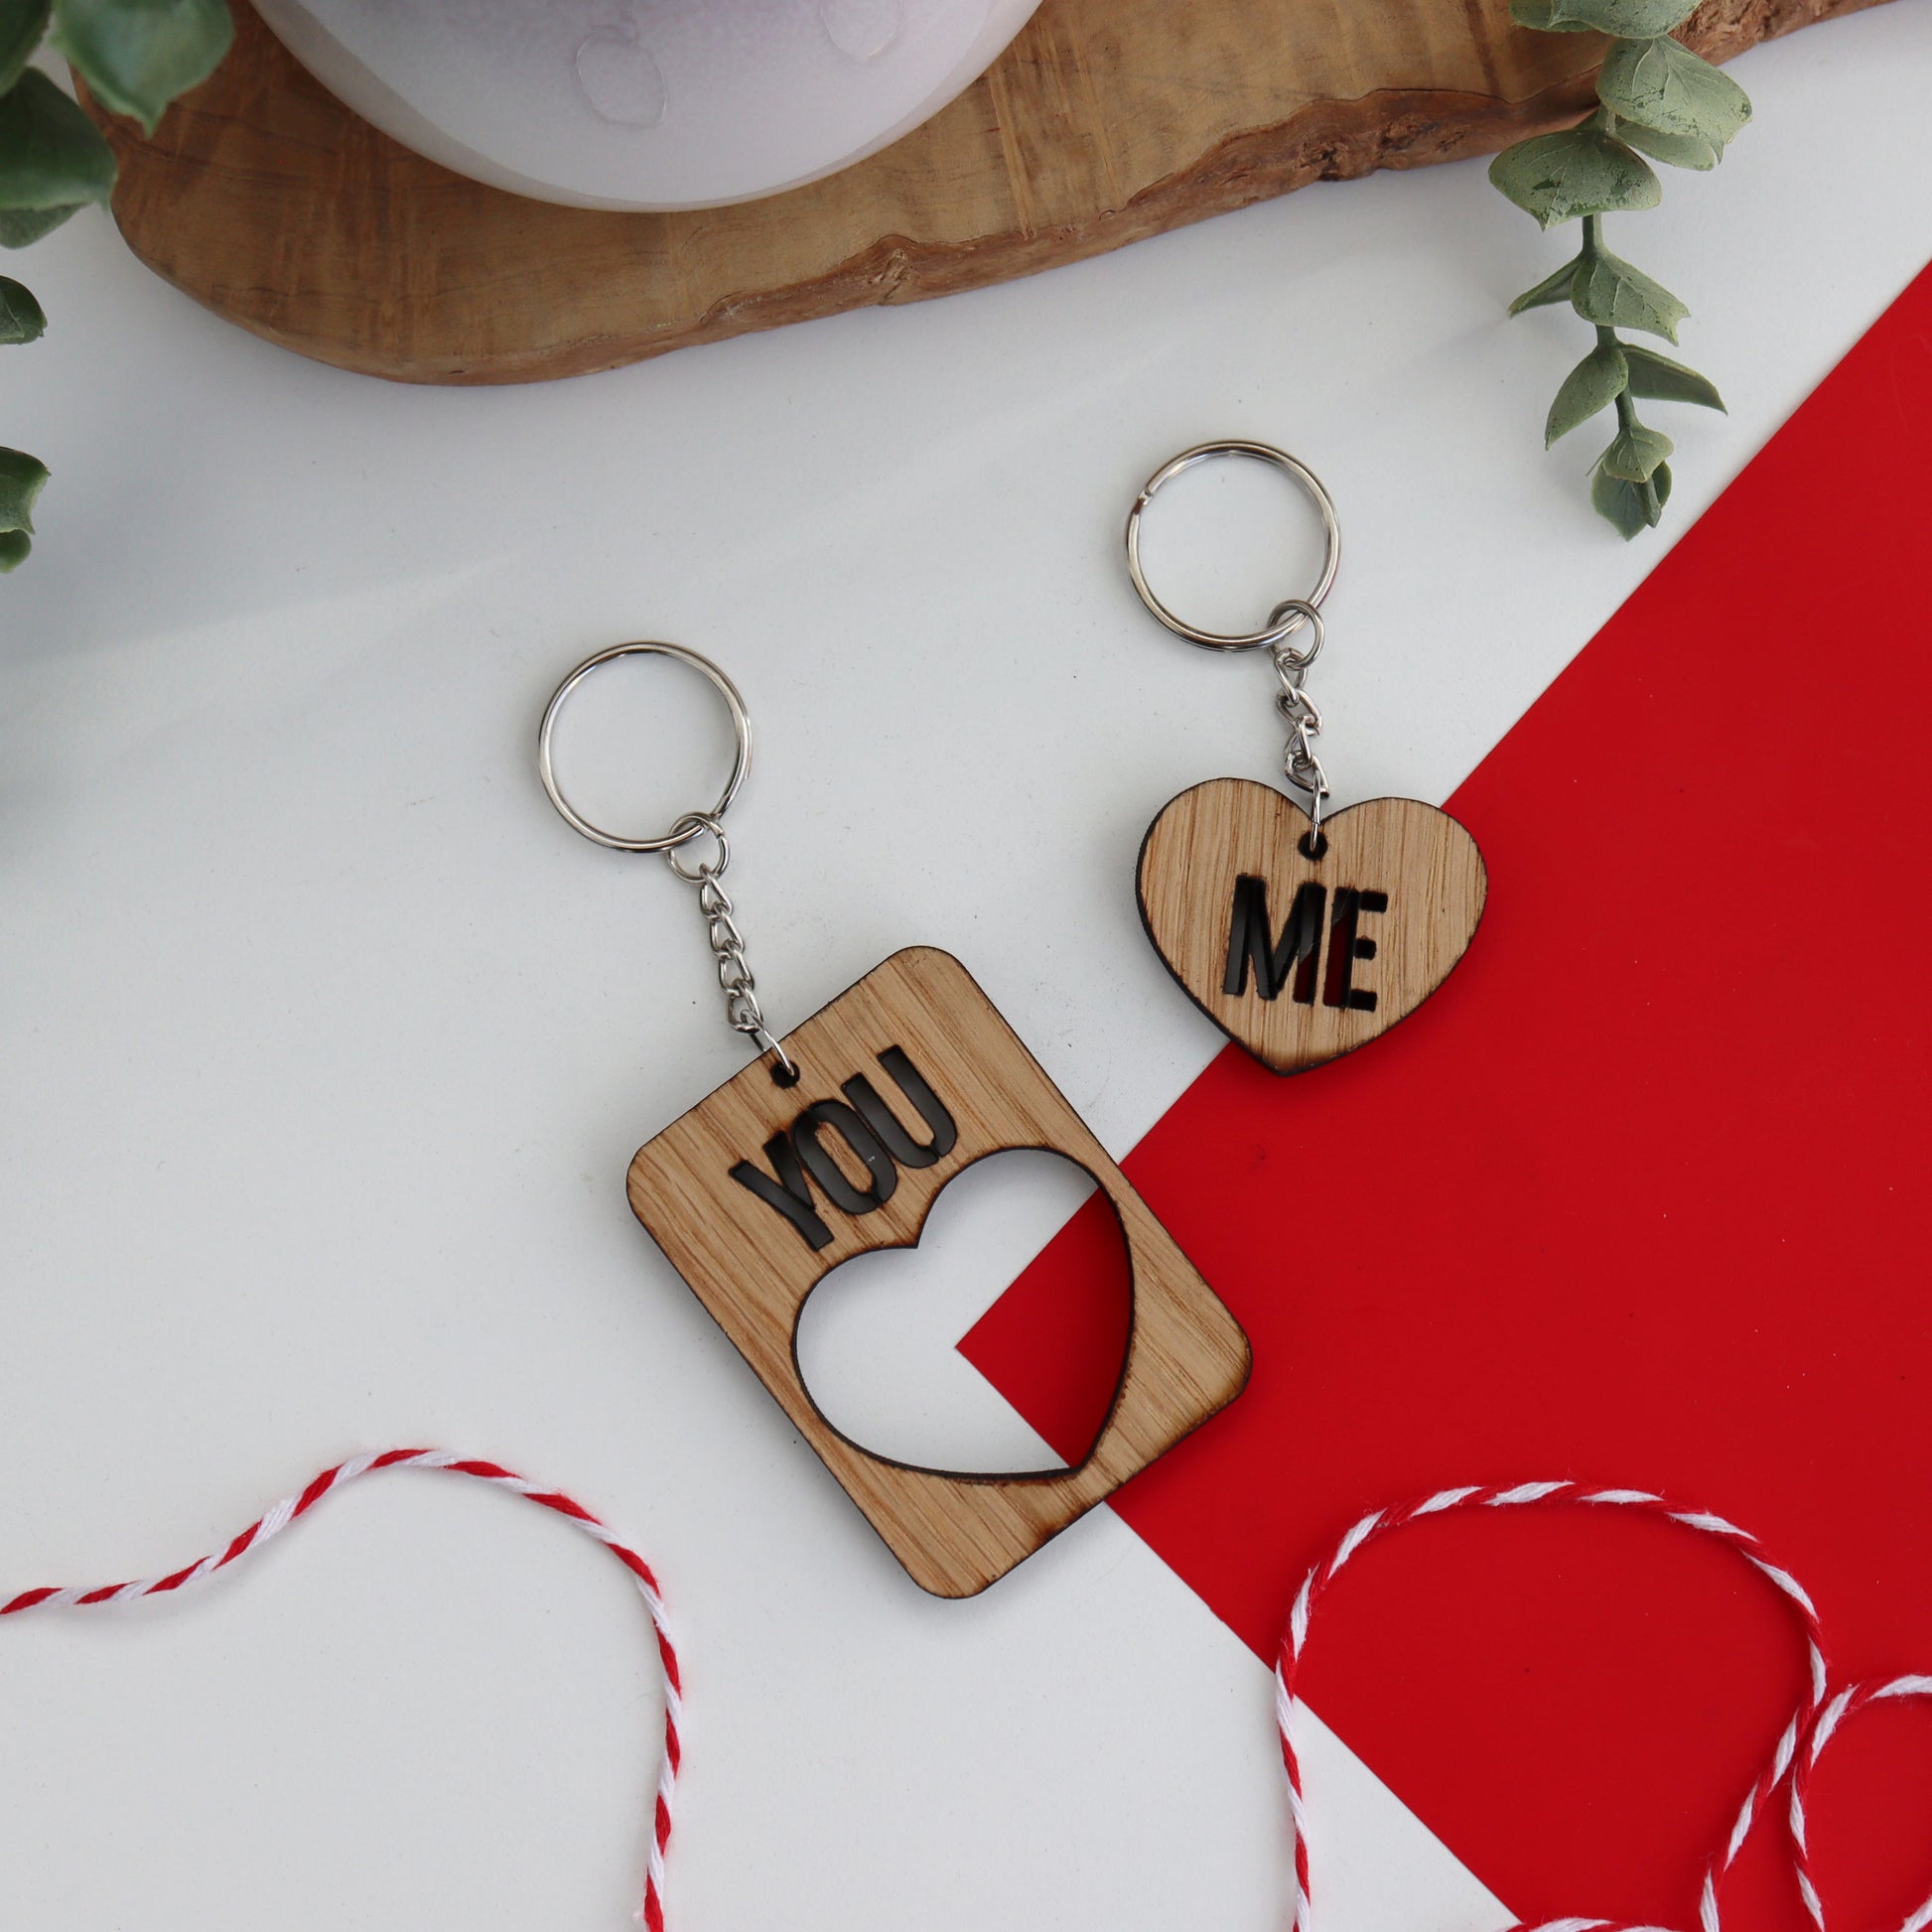 You and me keyring showing the heart within the rectangle keyring